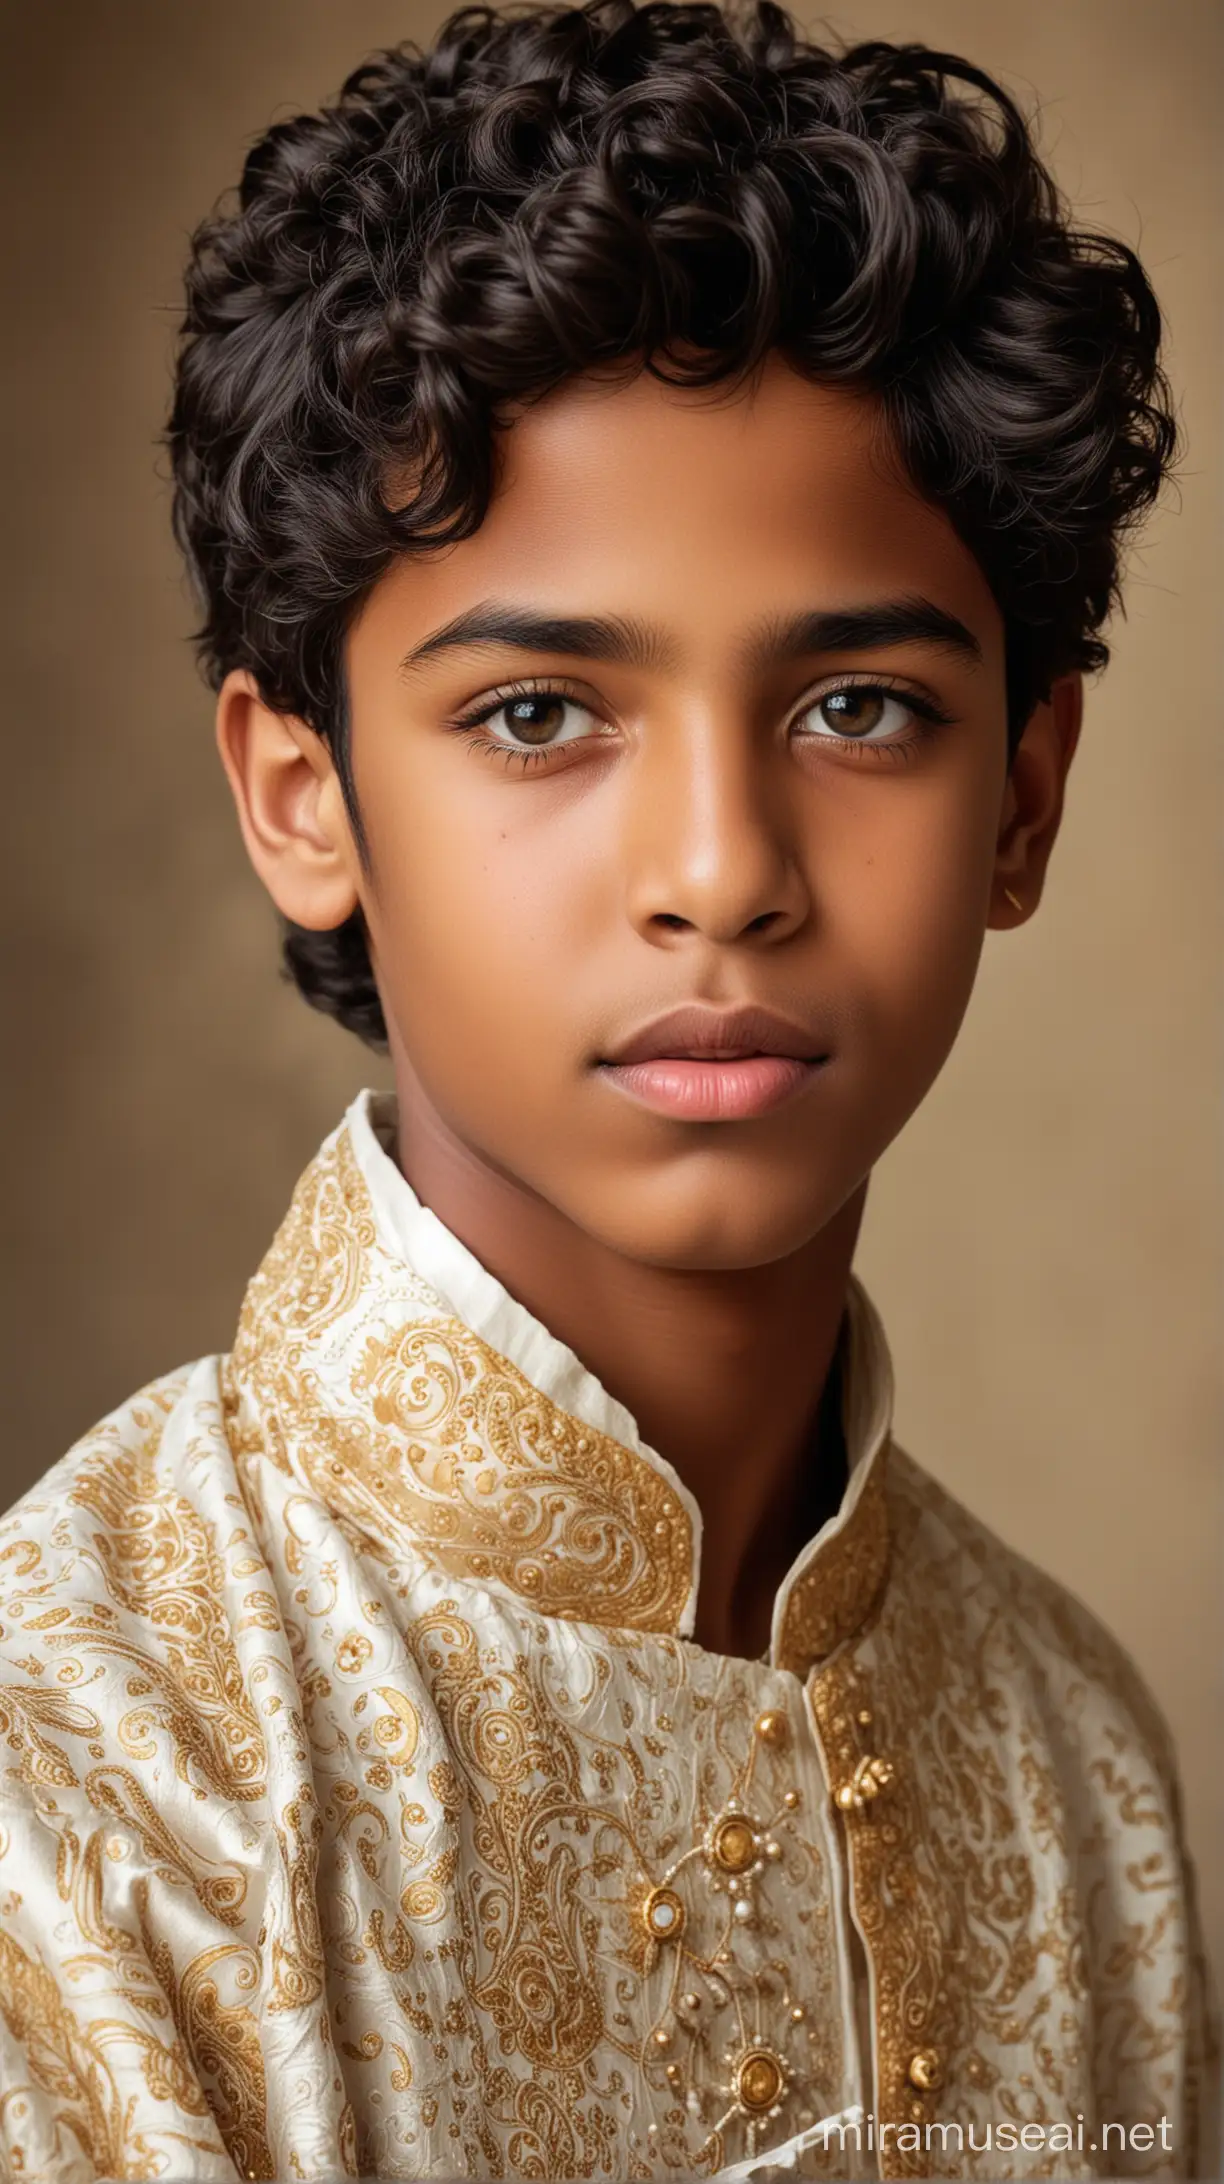 A 12 year old black boy with small eyes, small lips, straight nose, strong jawline and short curly side burnt black hair wearing an traditional sherwani and dhoti